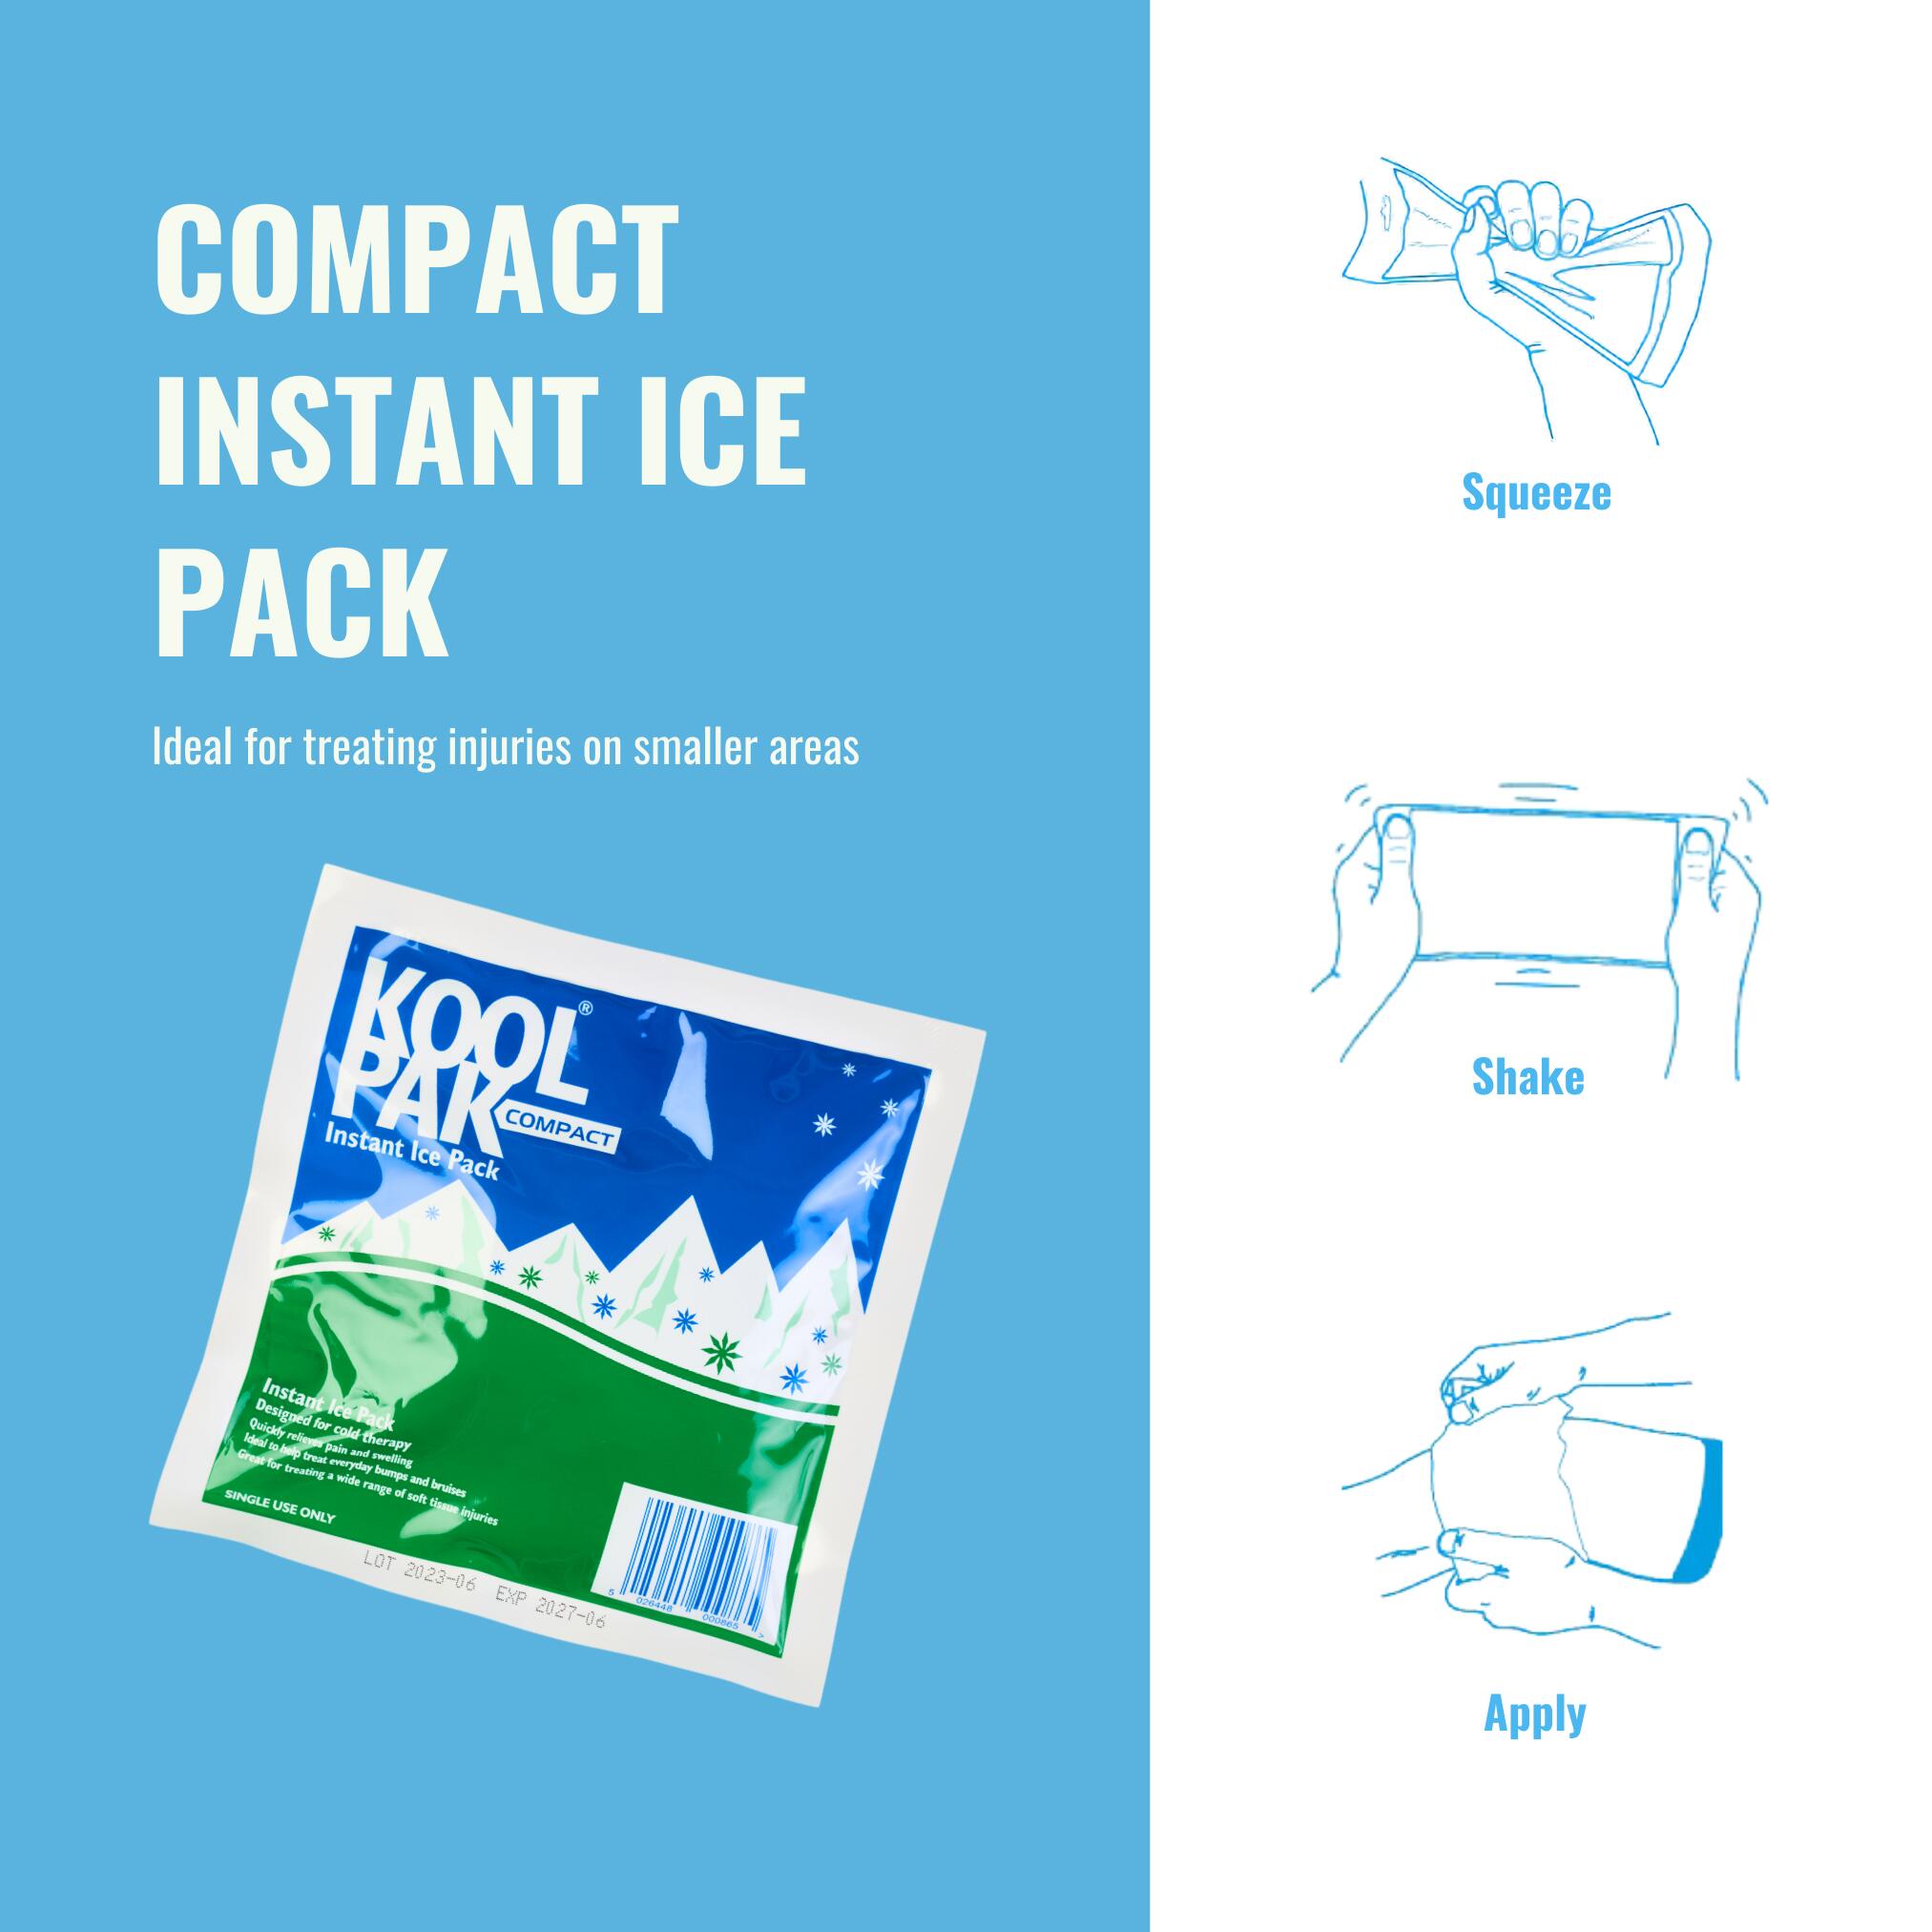 Koolpak Compact Instant Ice Pack - 15 x 15cm - Pack of 20 2/5